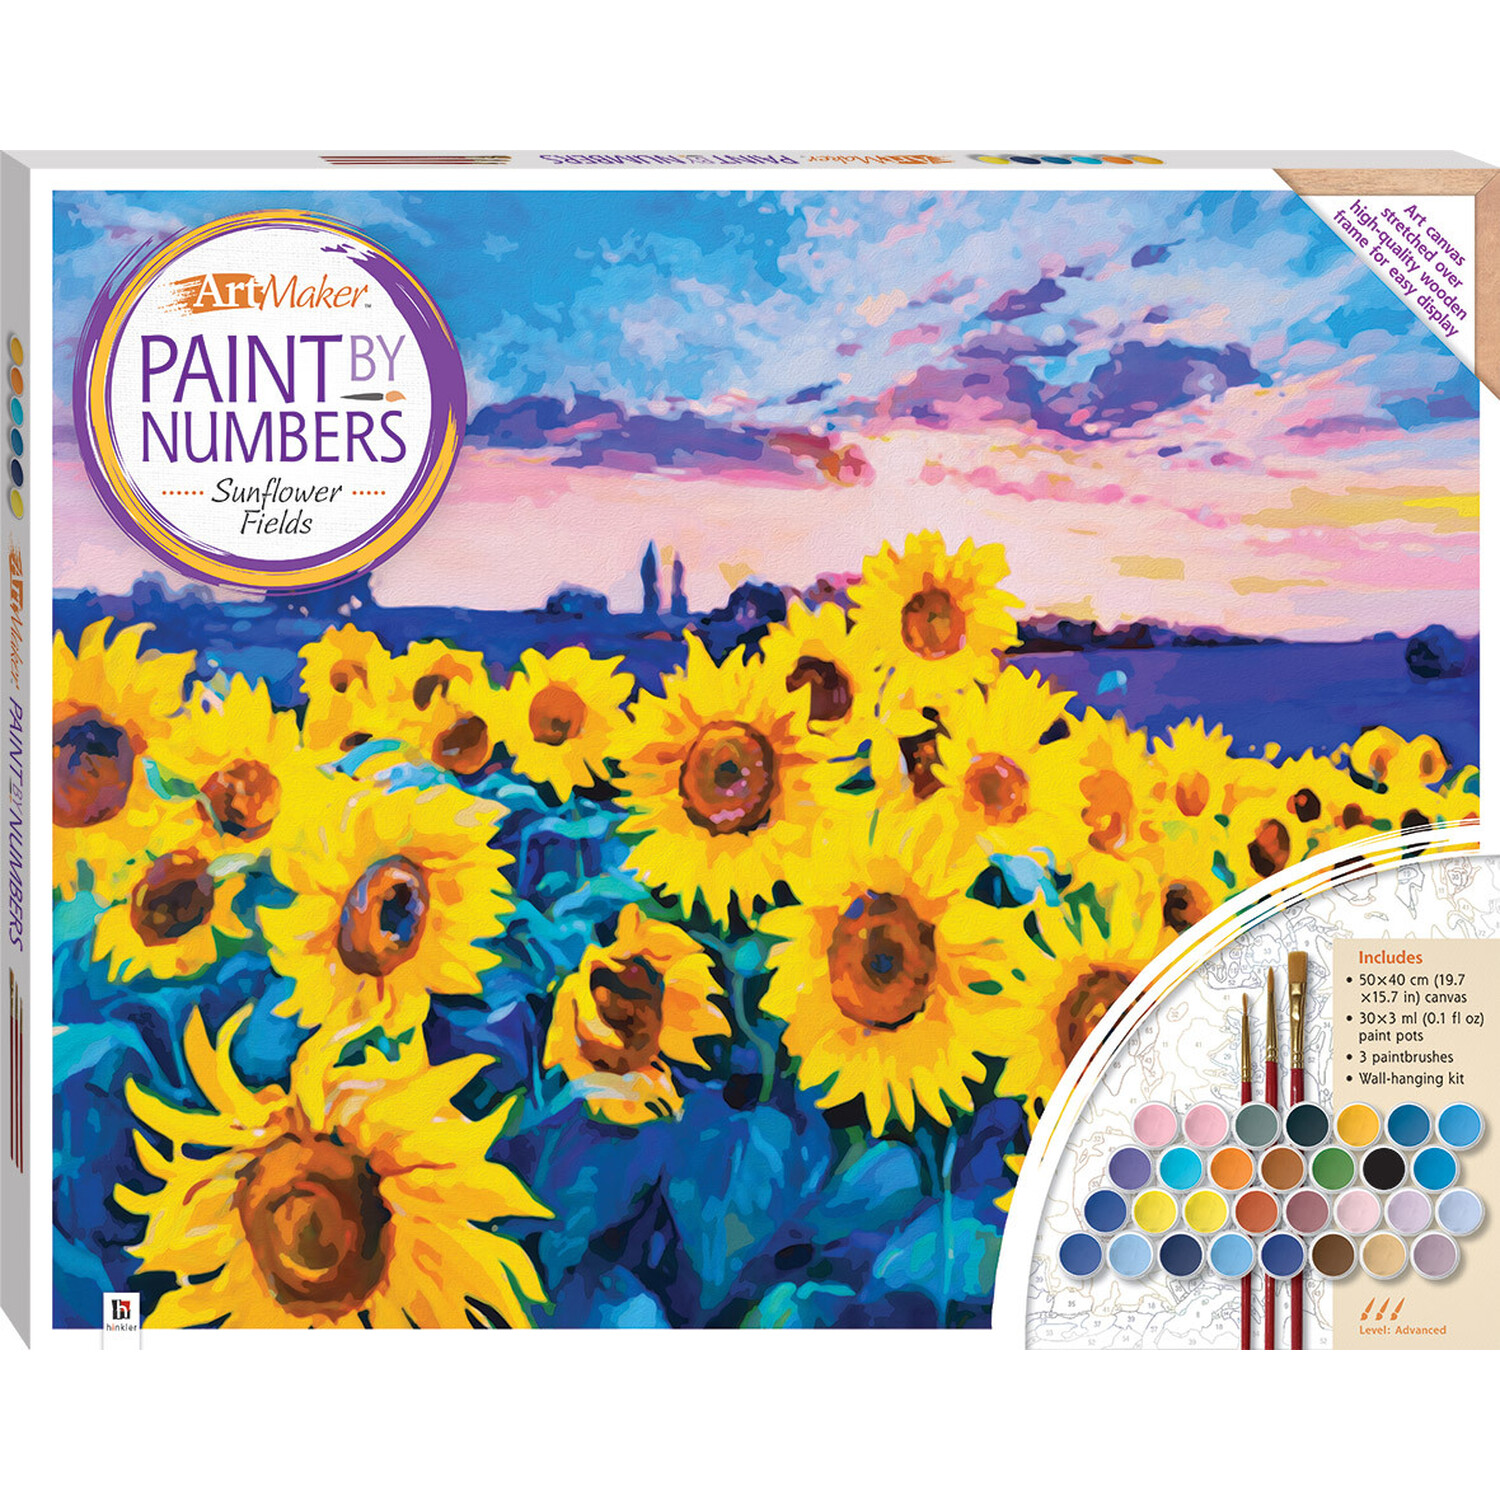 Hinkler Paint by Numbers Sunflower Field Canvas 51.1 x 41.1cm Image